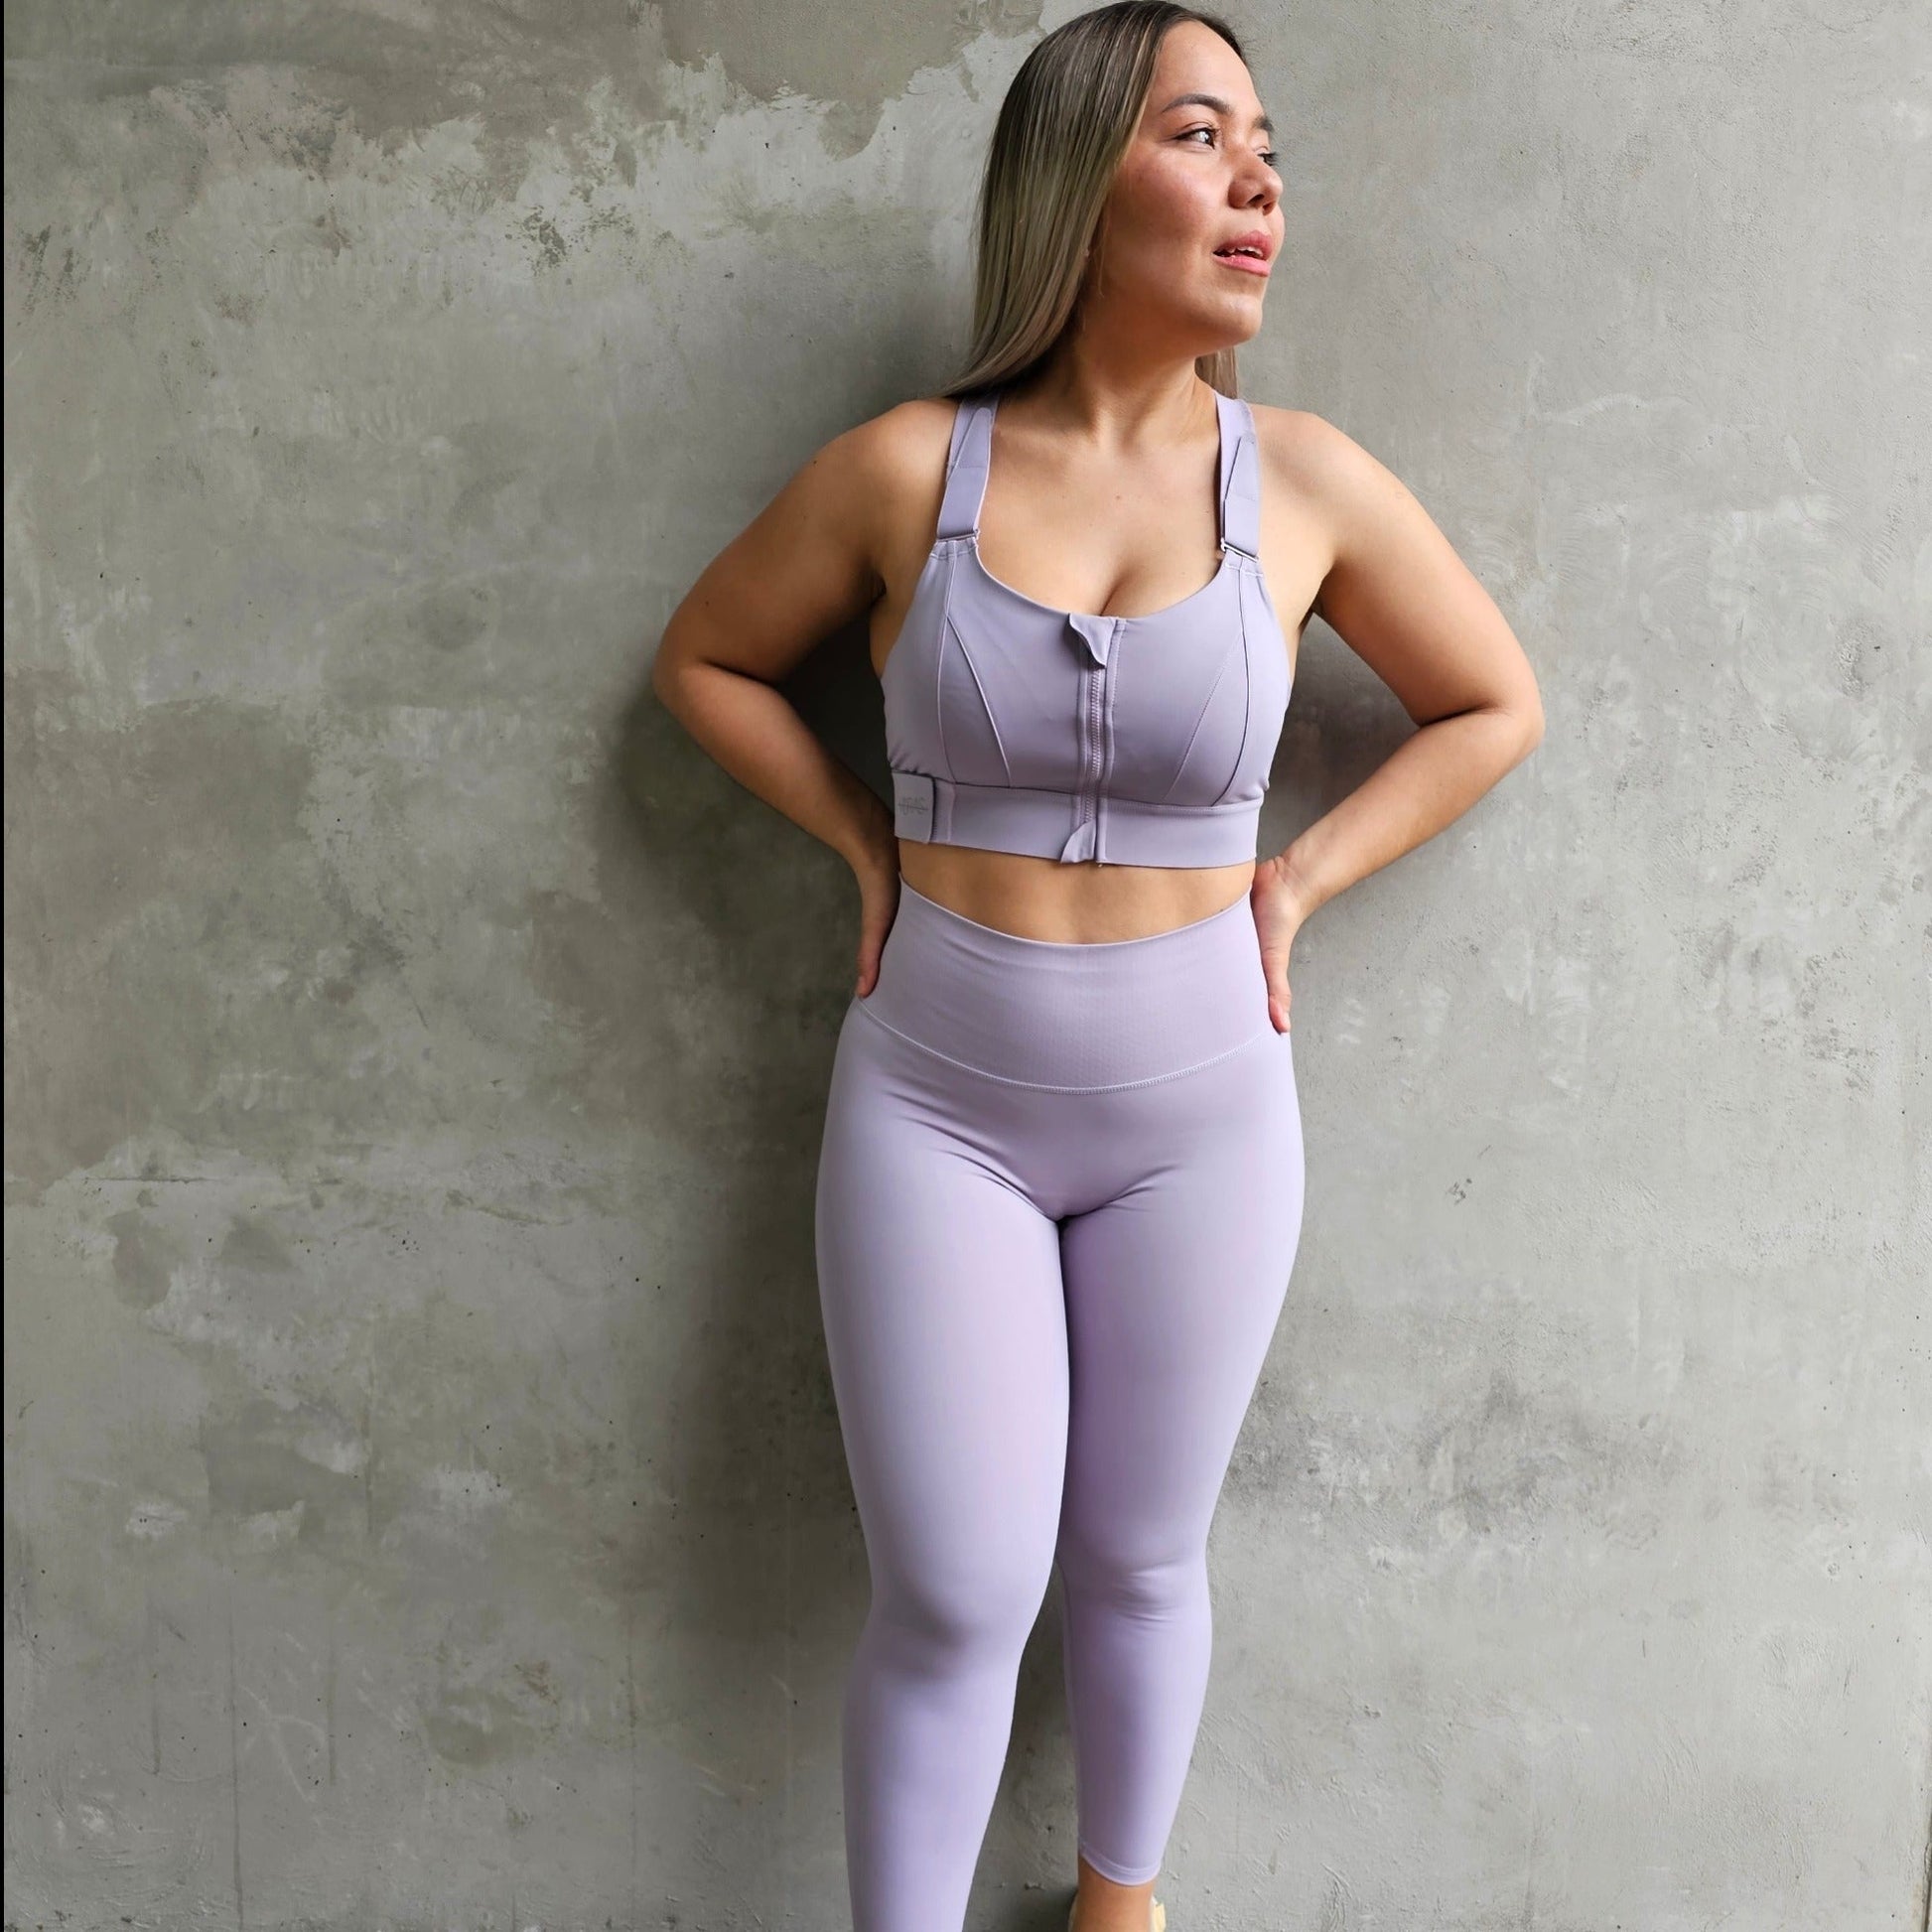 How to Get the Best Squat Proof Leggings for Workout - Shape Brazil